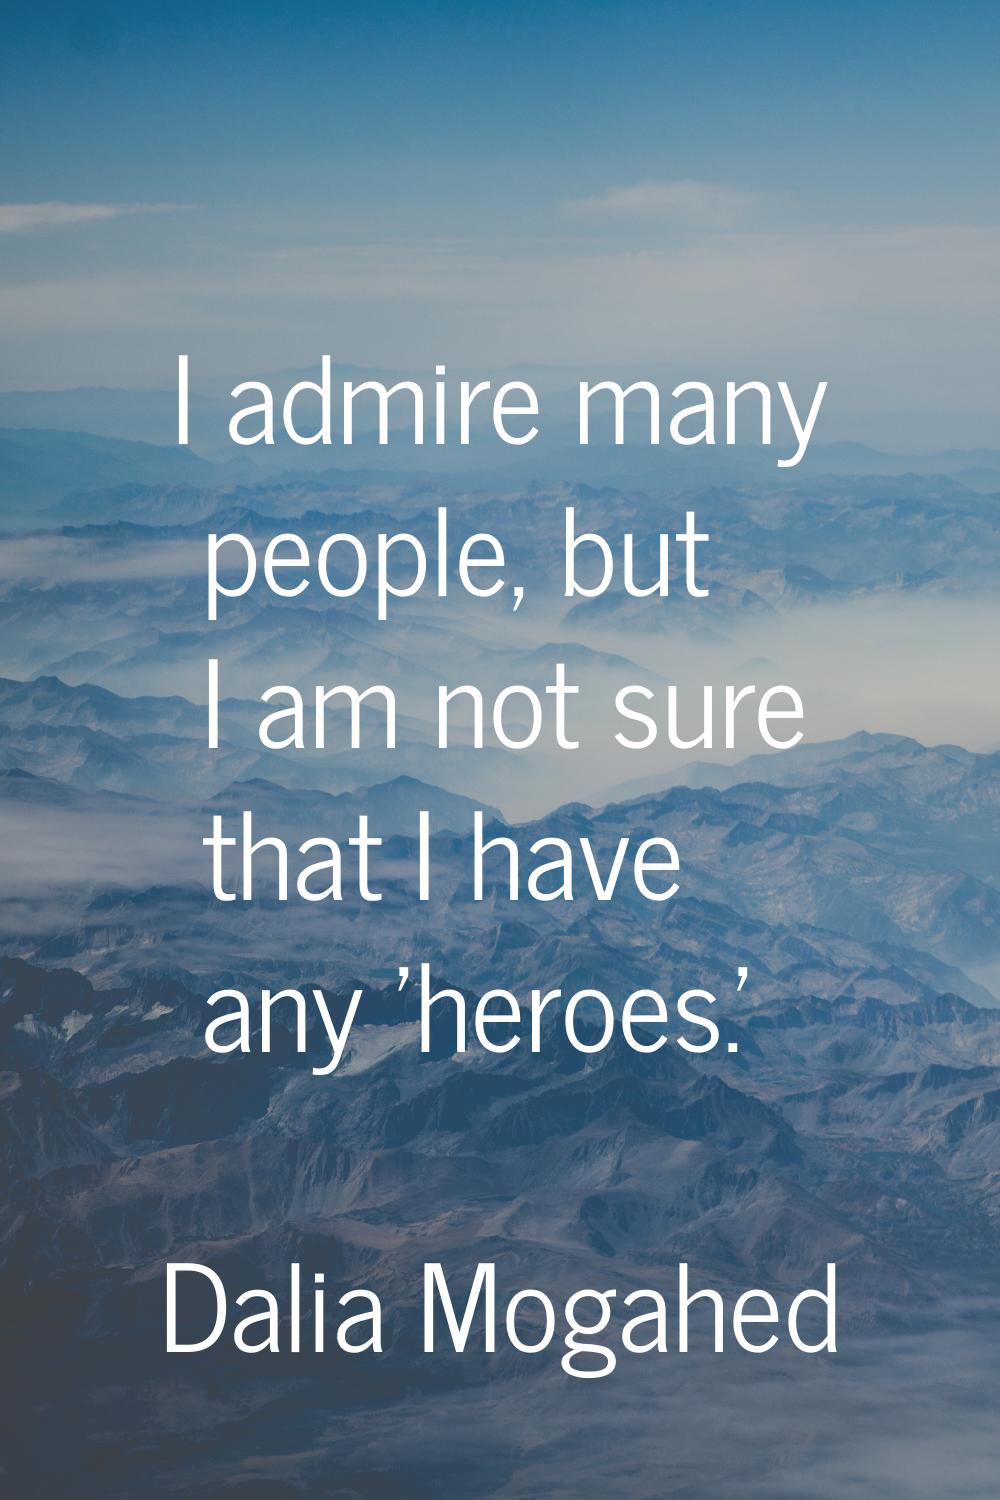 I admire many people, but I am not sure that I have any 'heroes.'